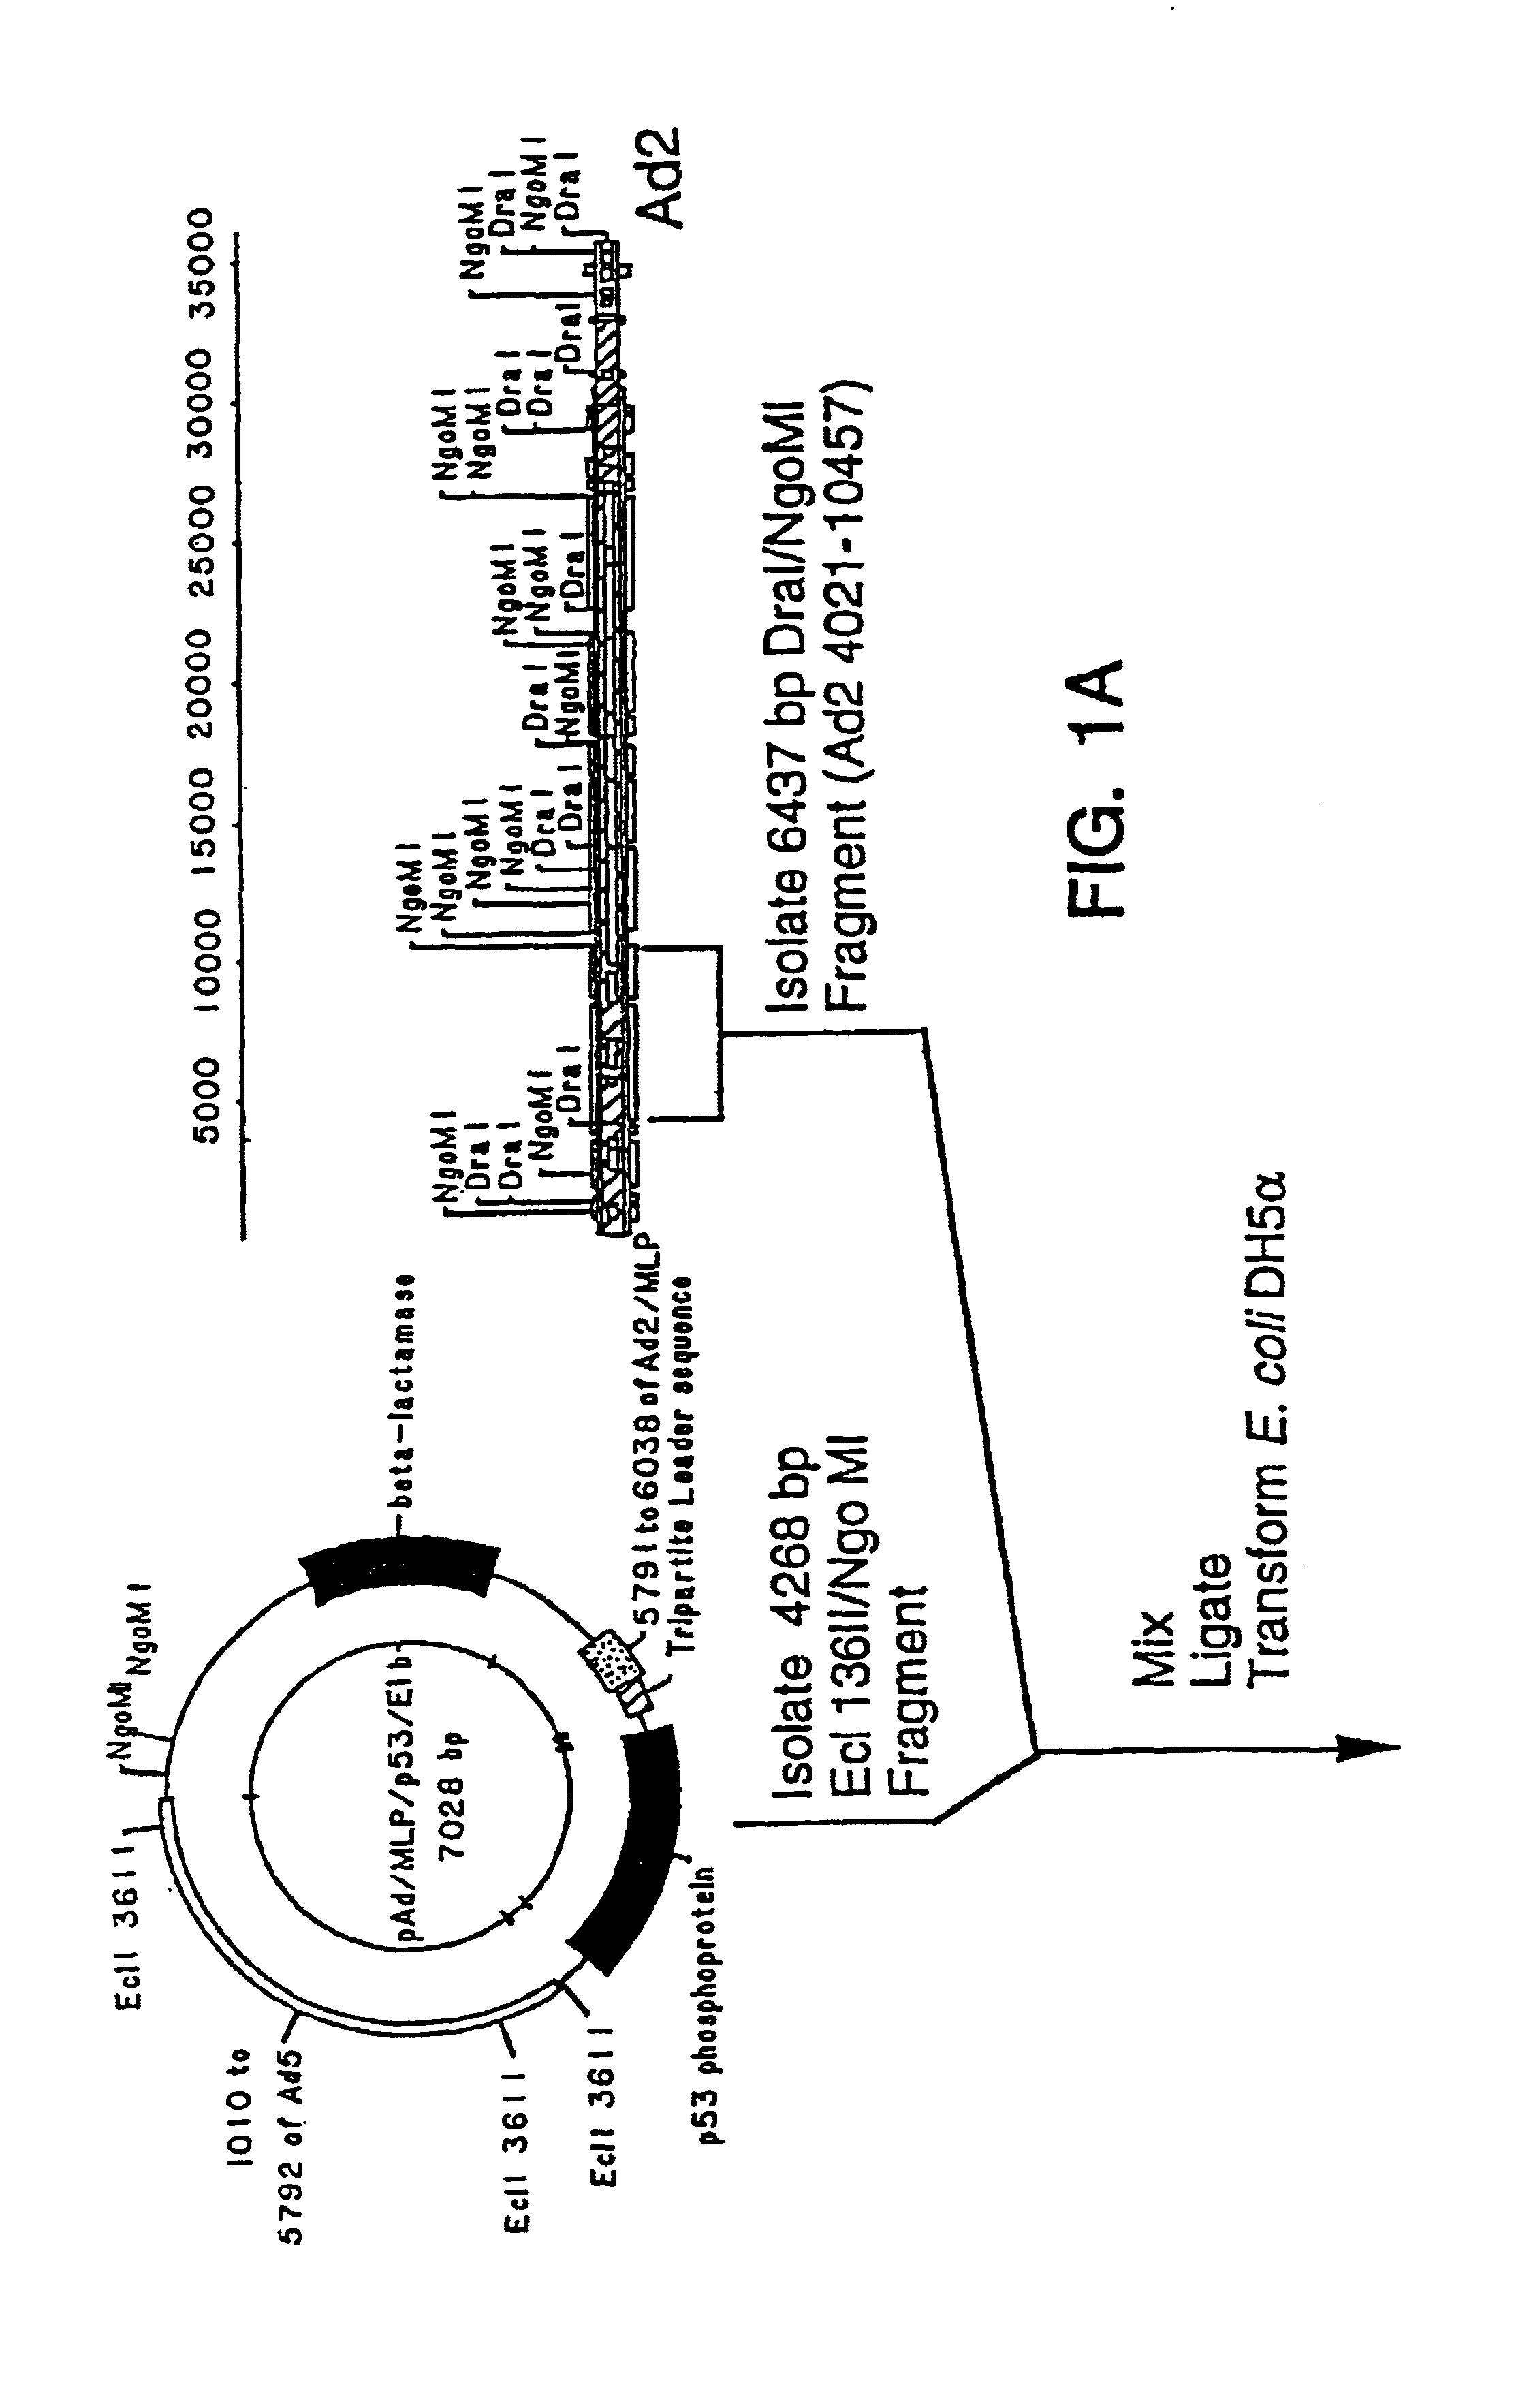 Recombinant adenoviral vector and method of use